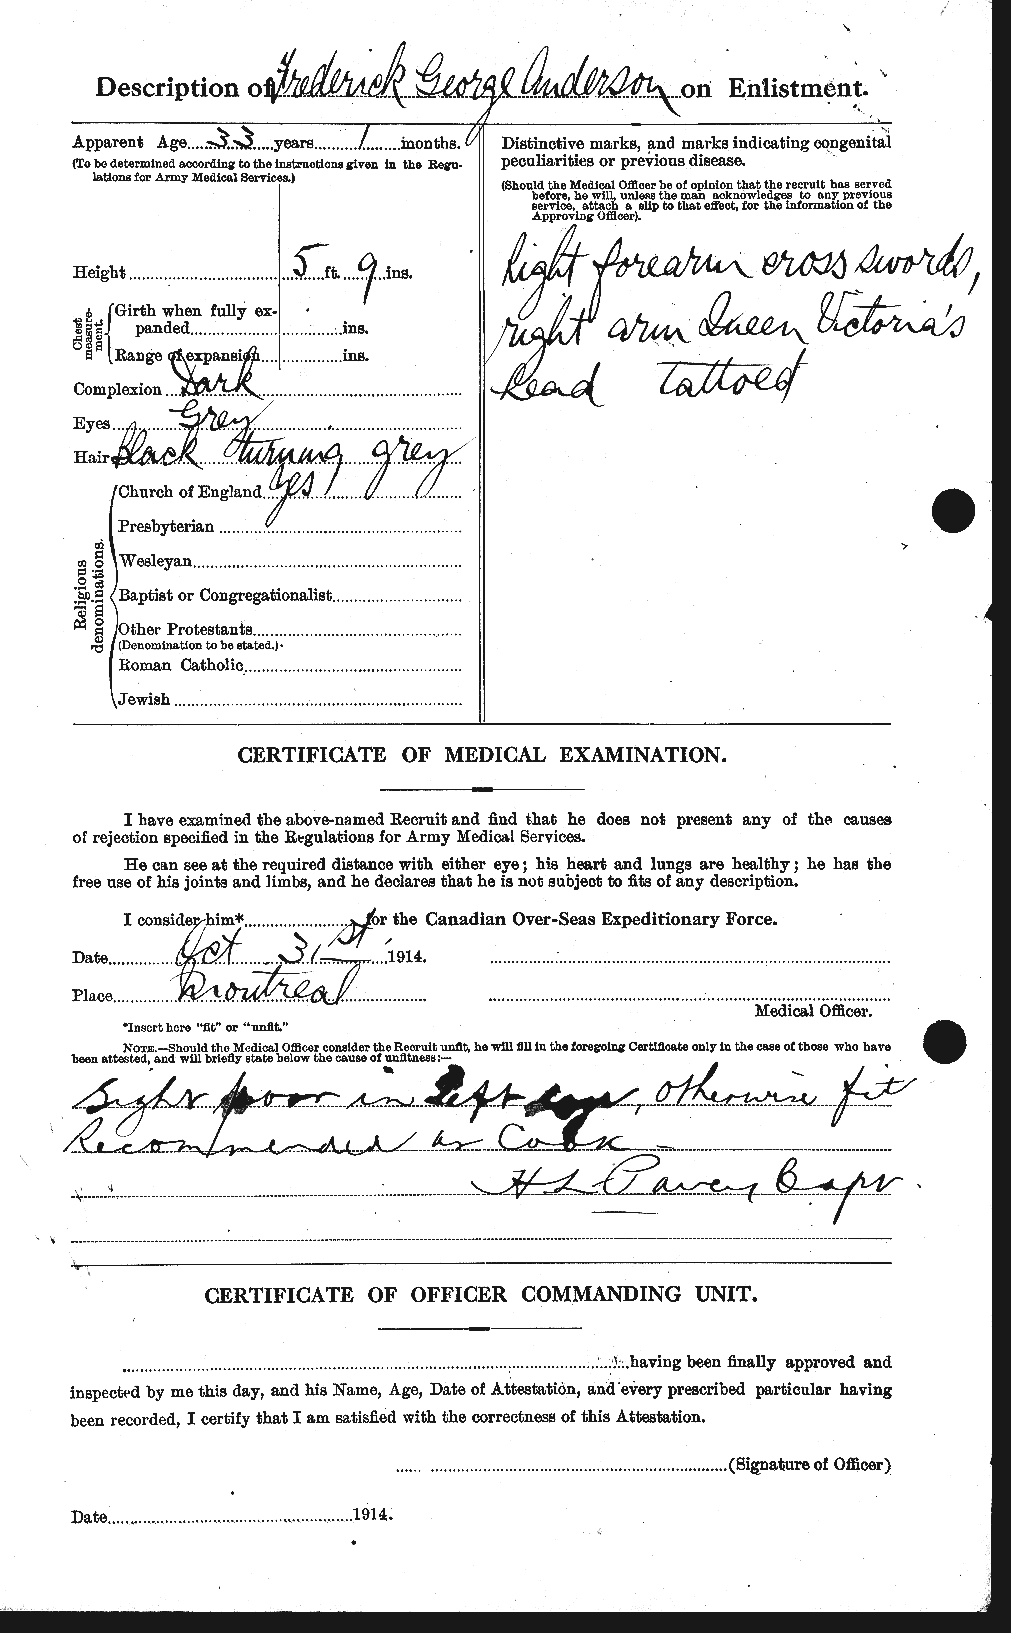 Personnel Records of the First World War - CEF 209816b